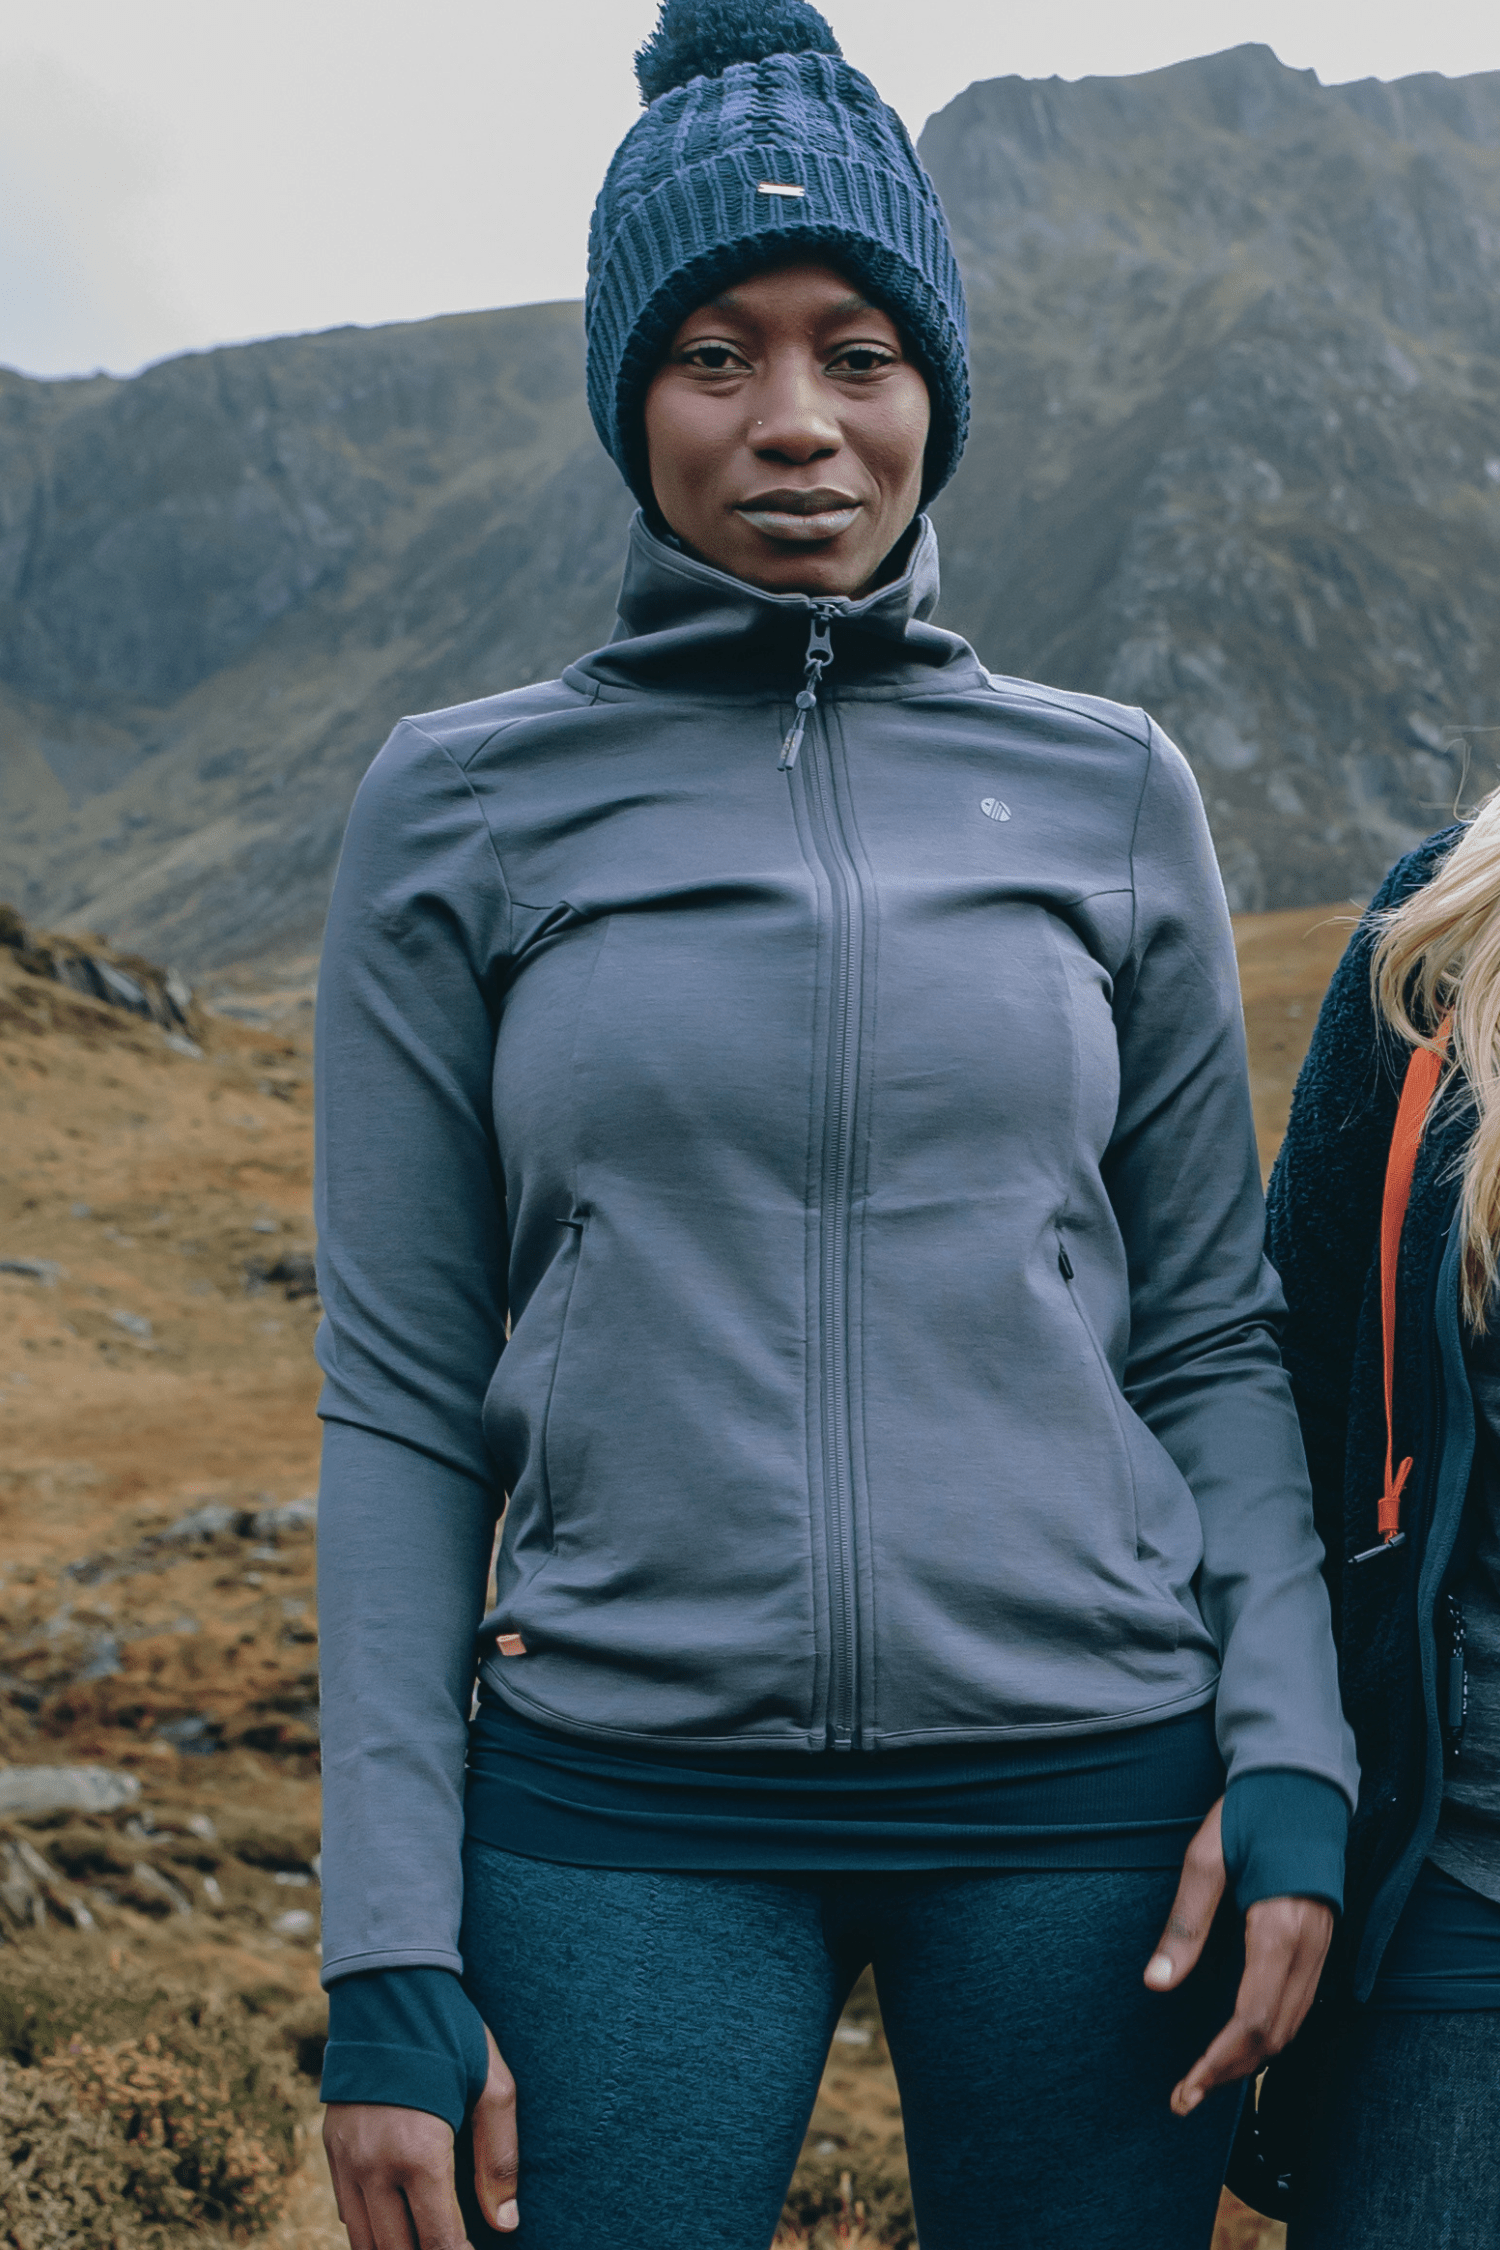 ACAI Outdoorwear - Style, Performance, Fit